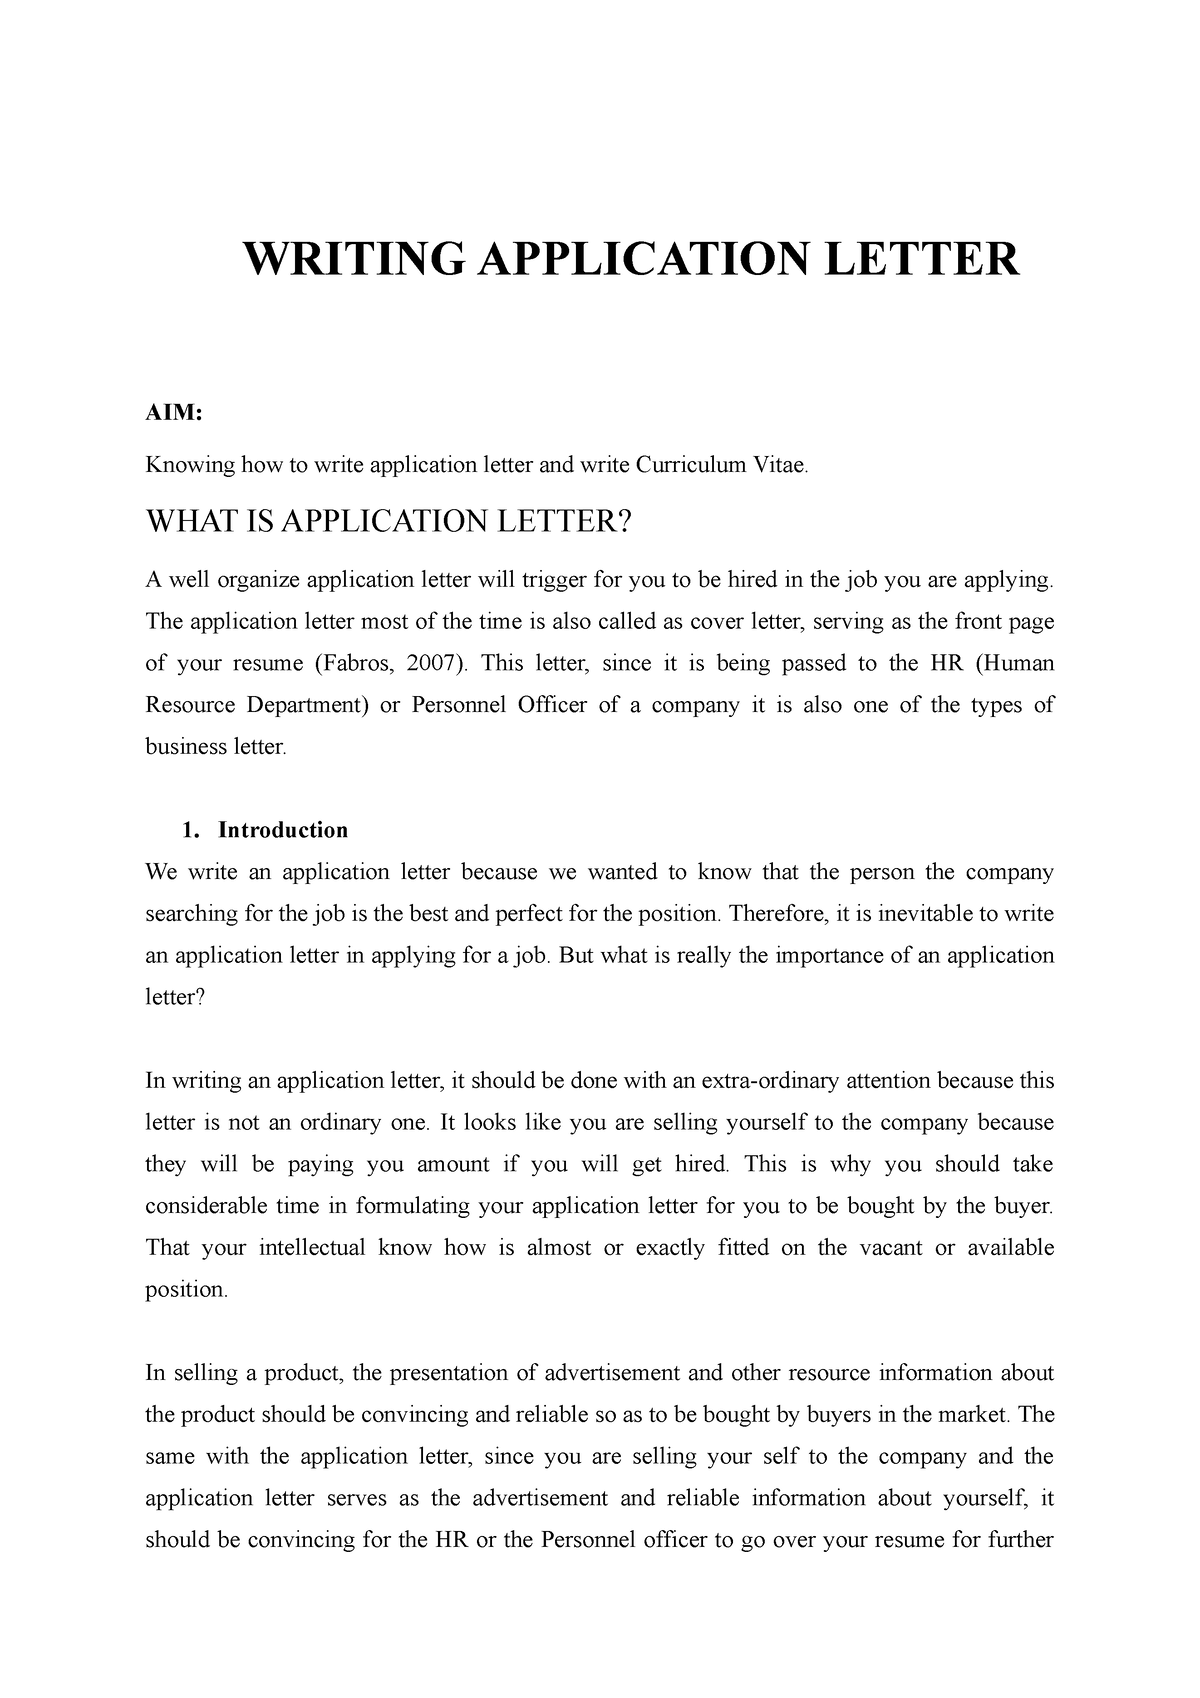 the following are the purpose of application letter except